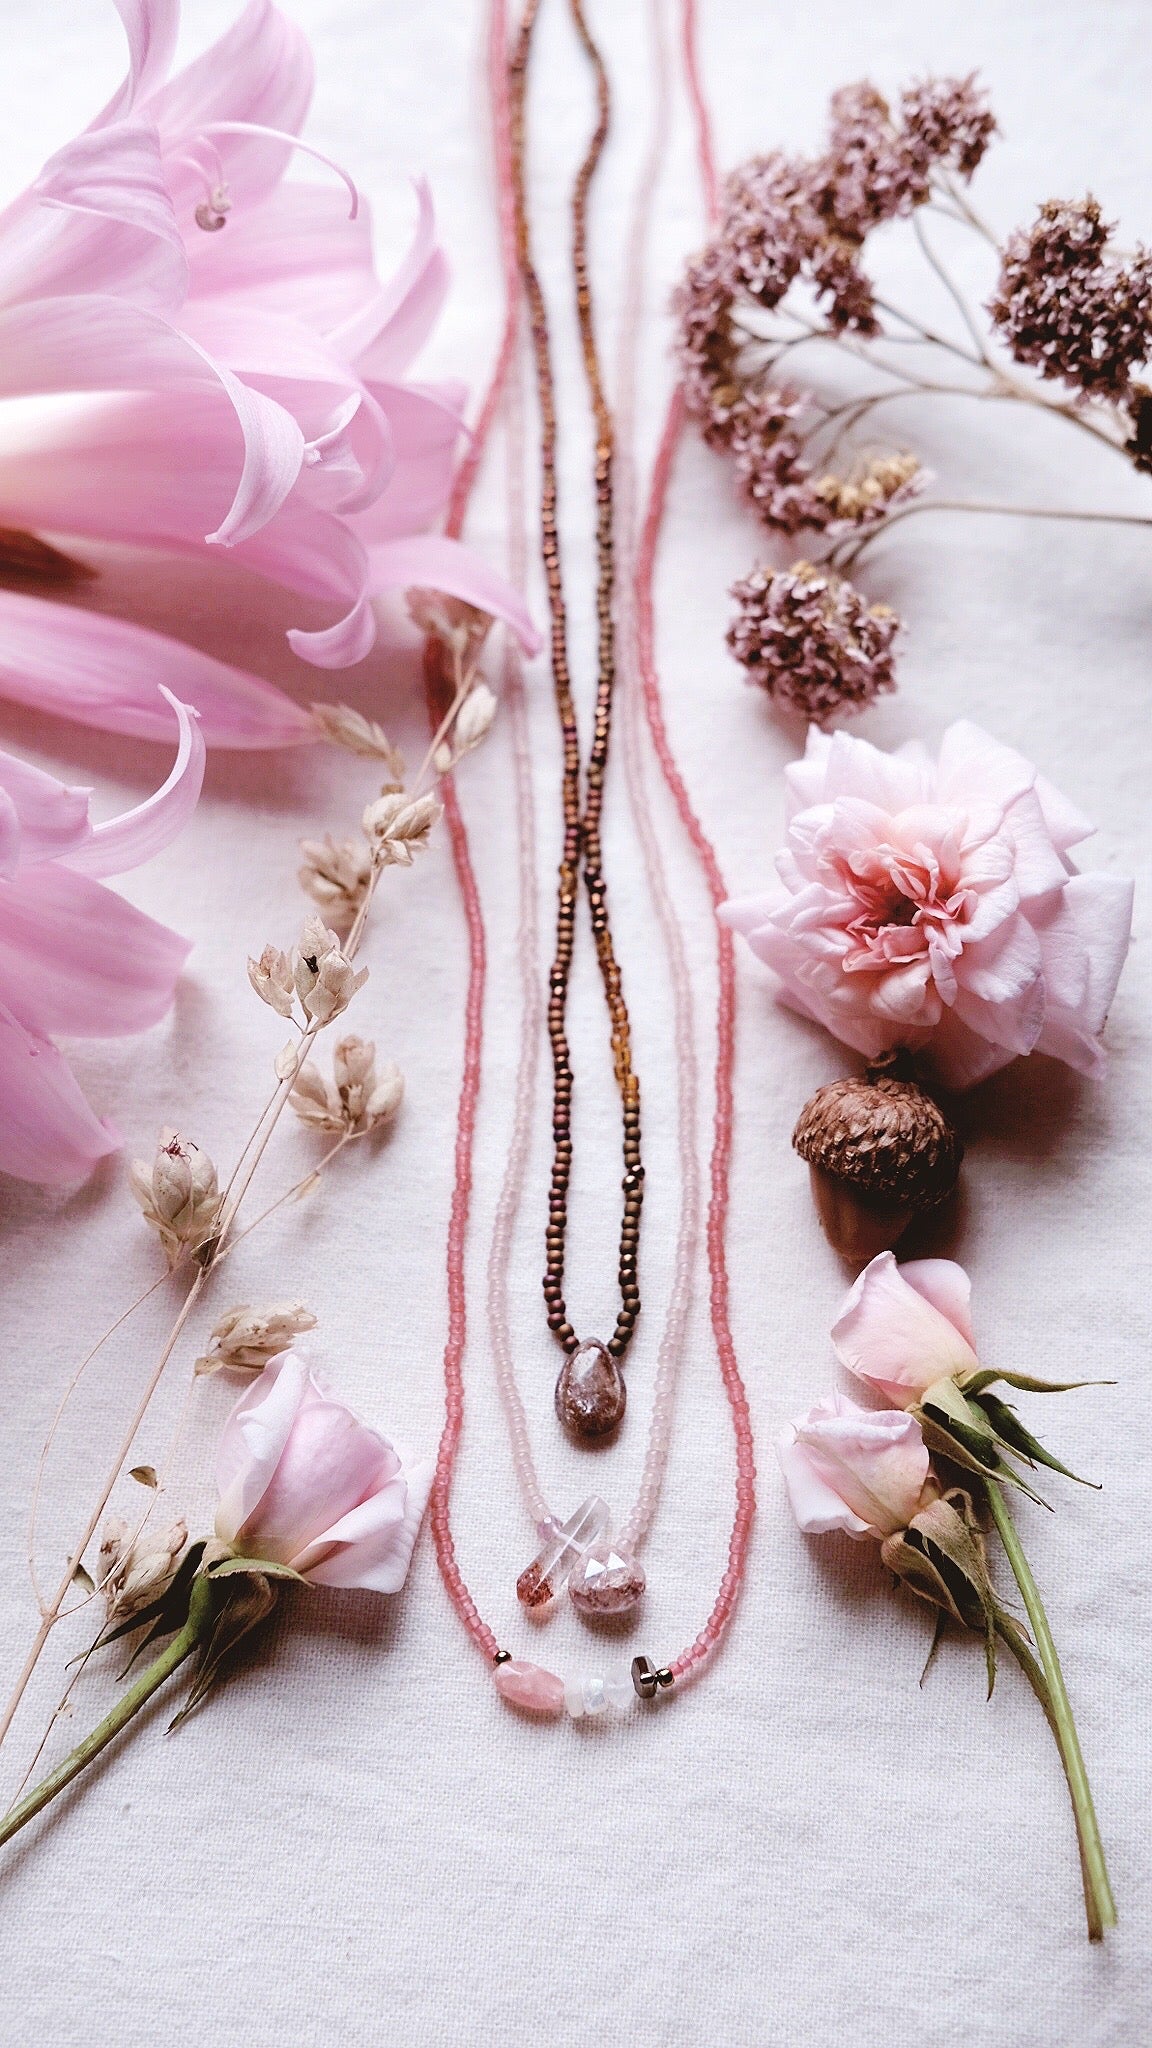 Earthstar + Kyanite + tranquility beaded necklace